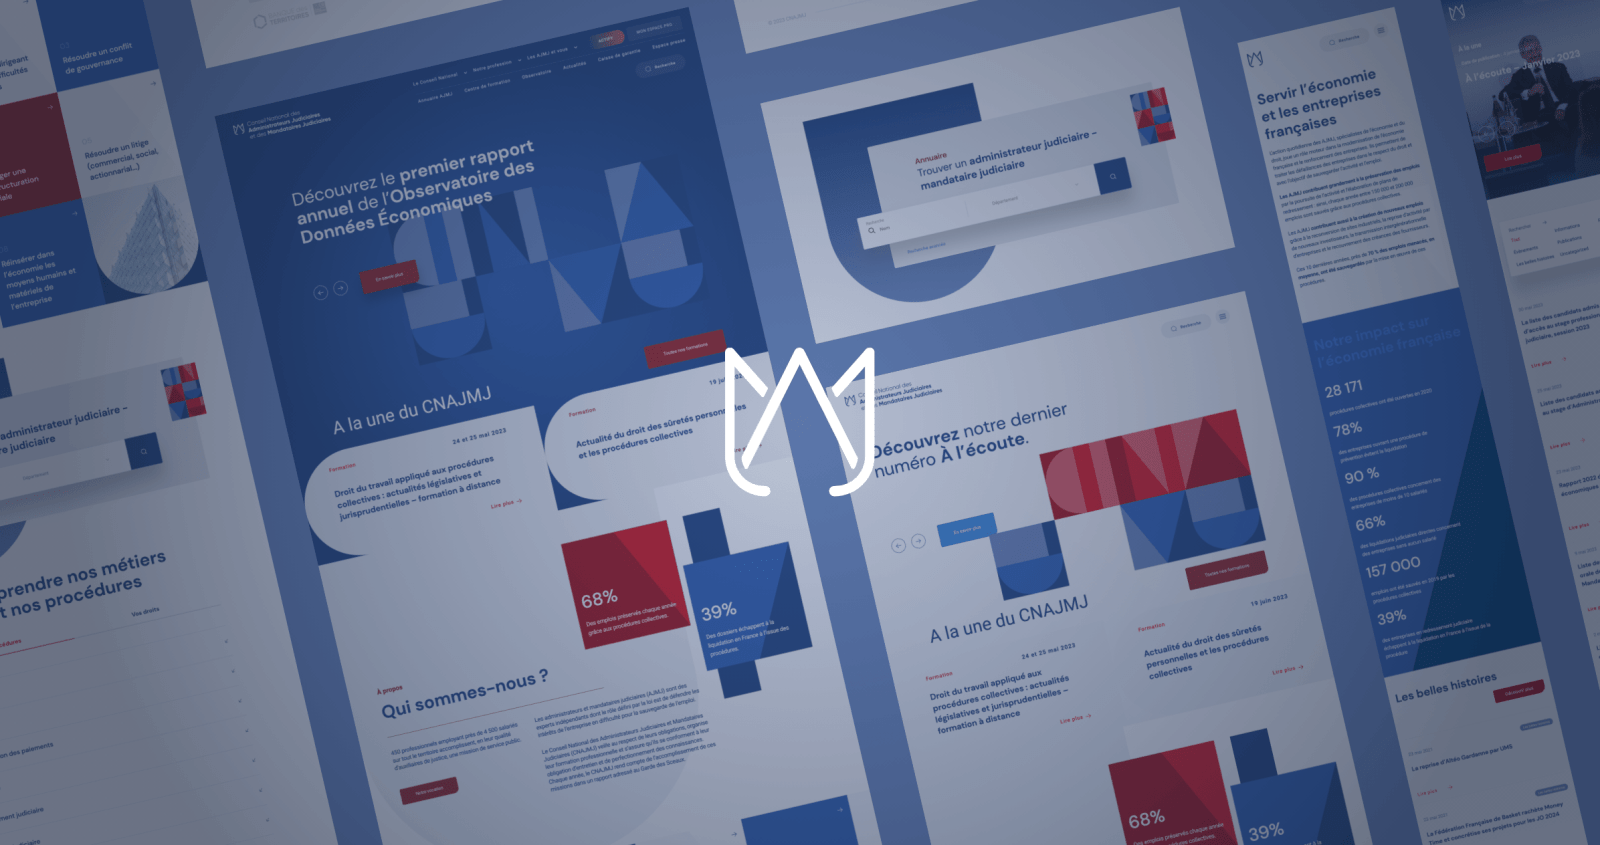 Redesign of a professional organization’s corporate and training websites